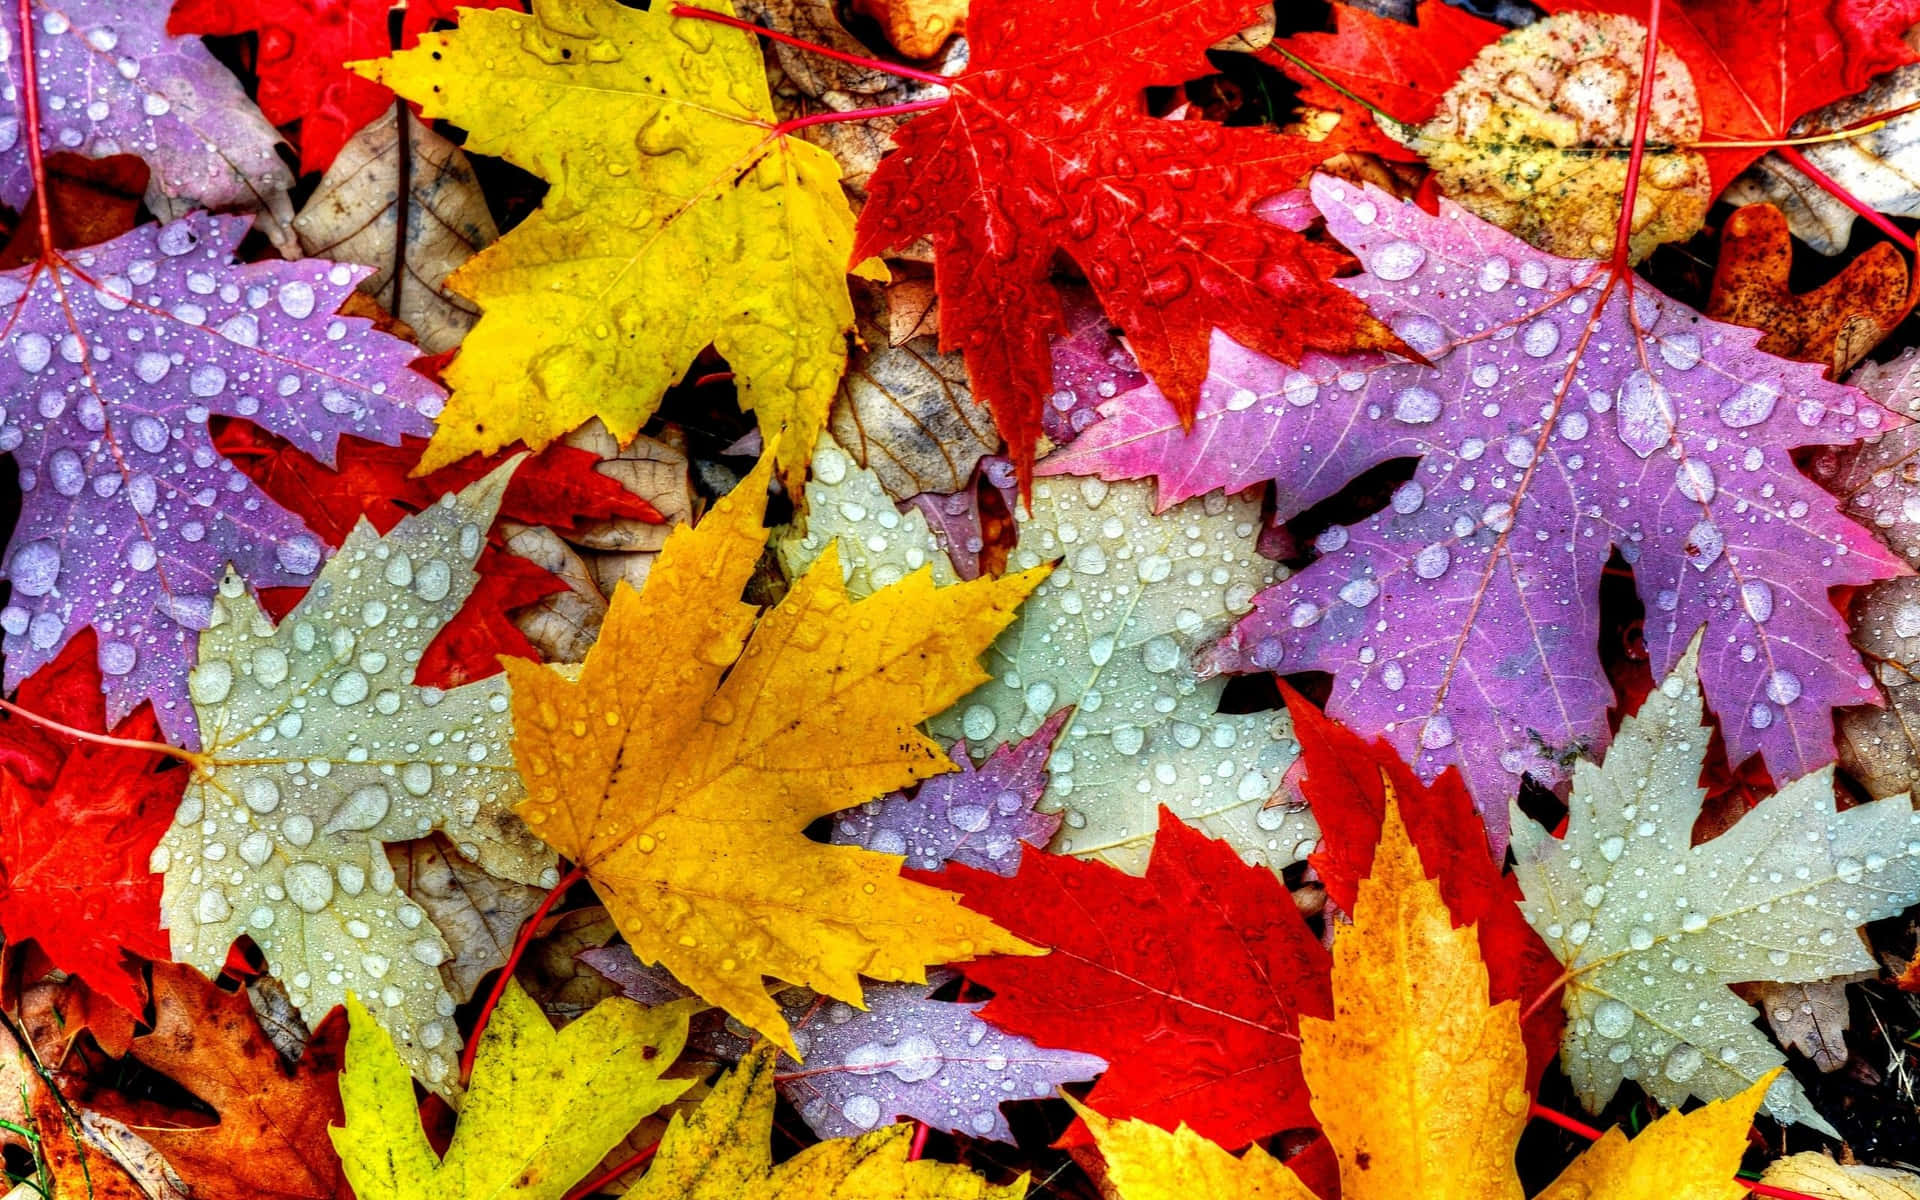 Colorful Leaves With Water Droplets On Them